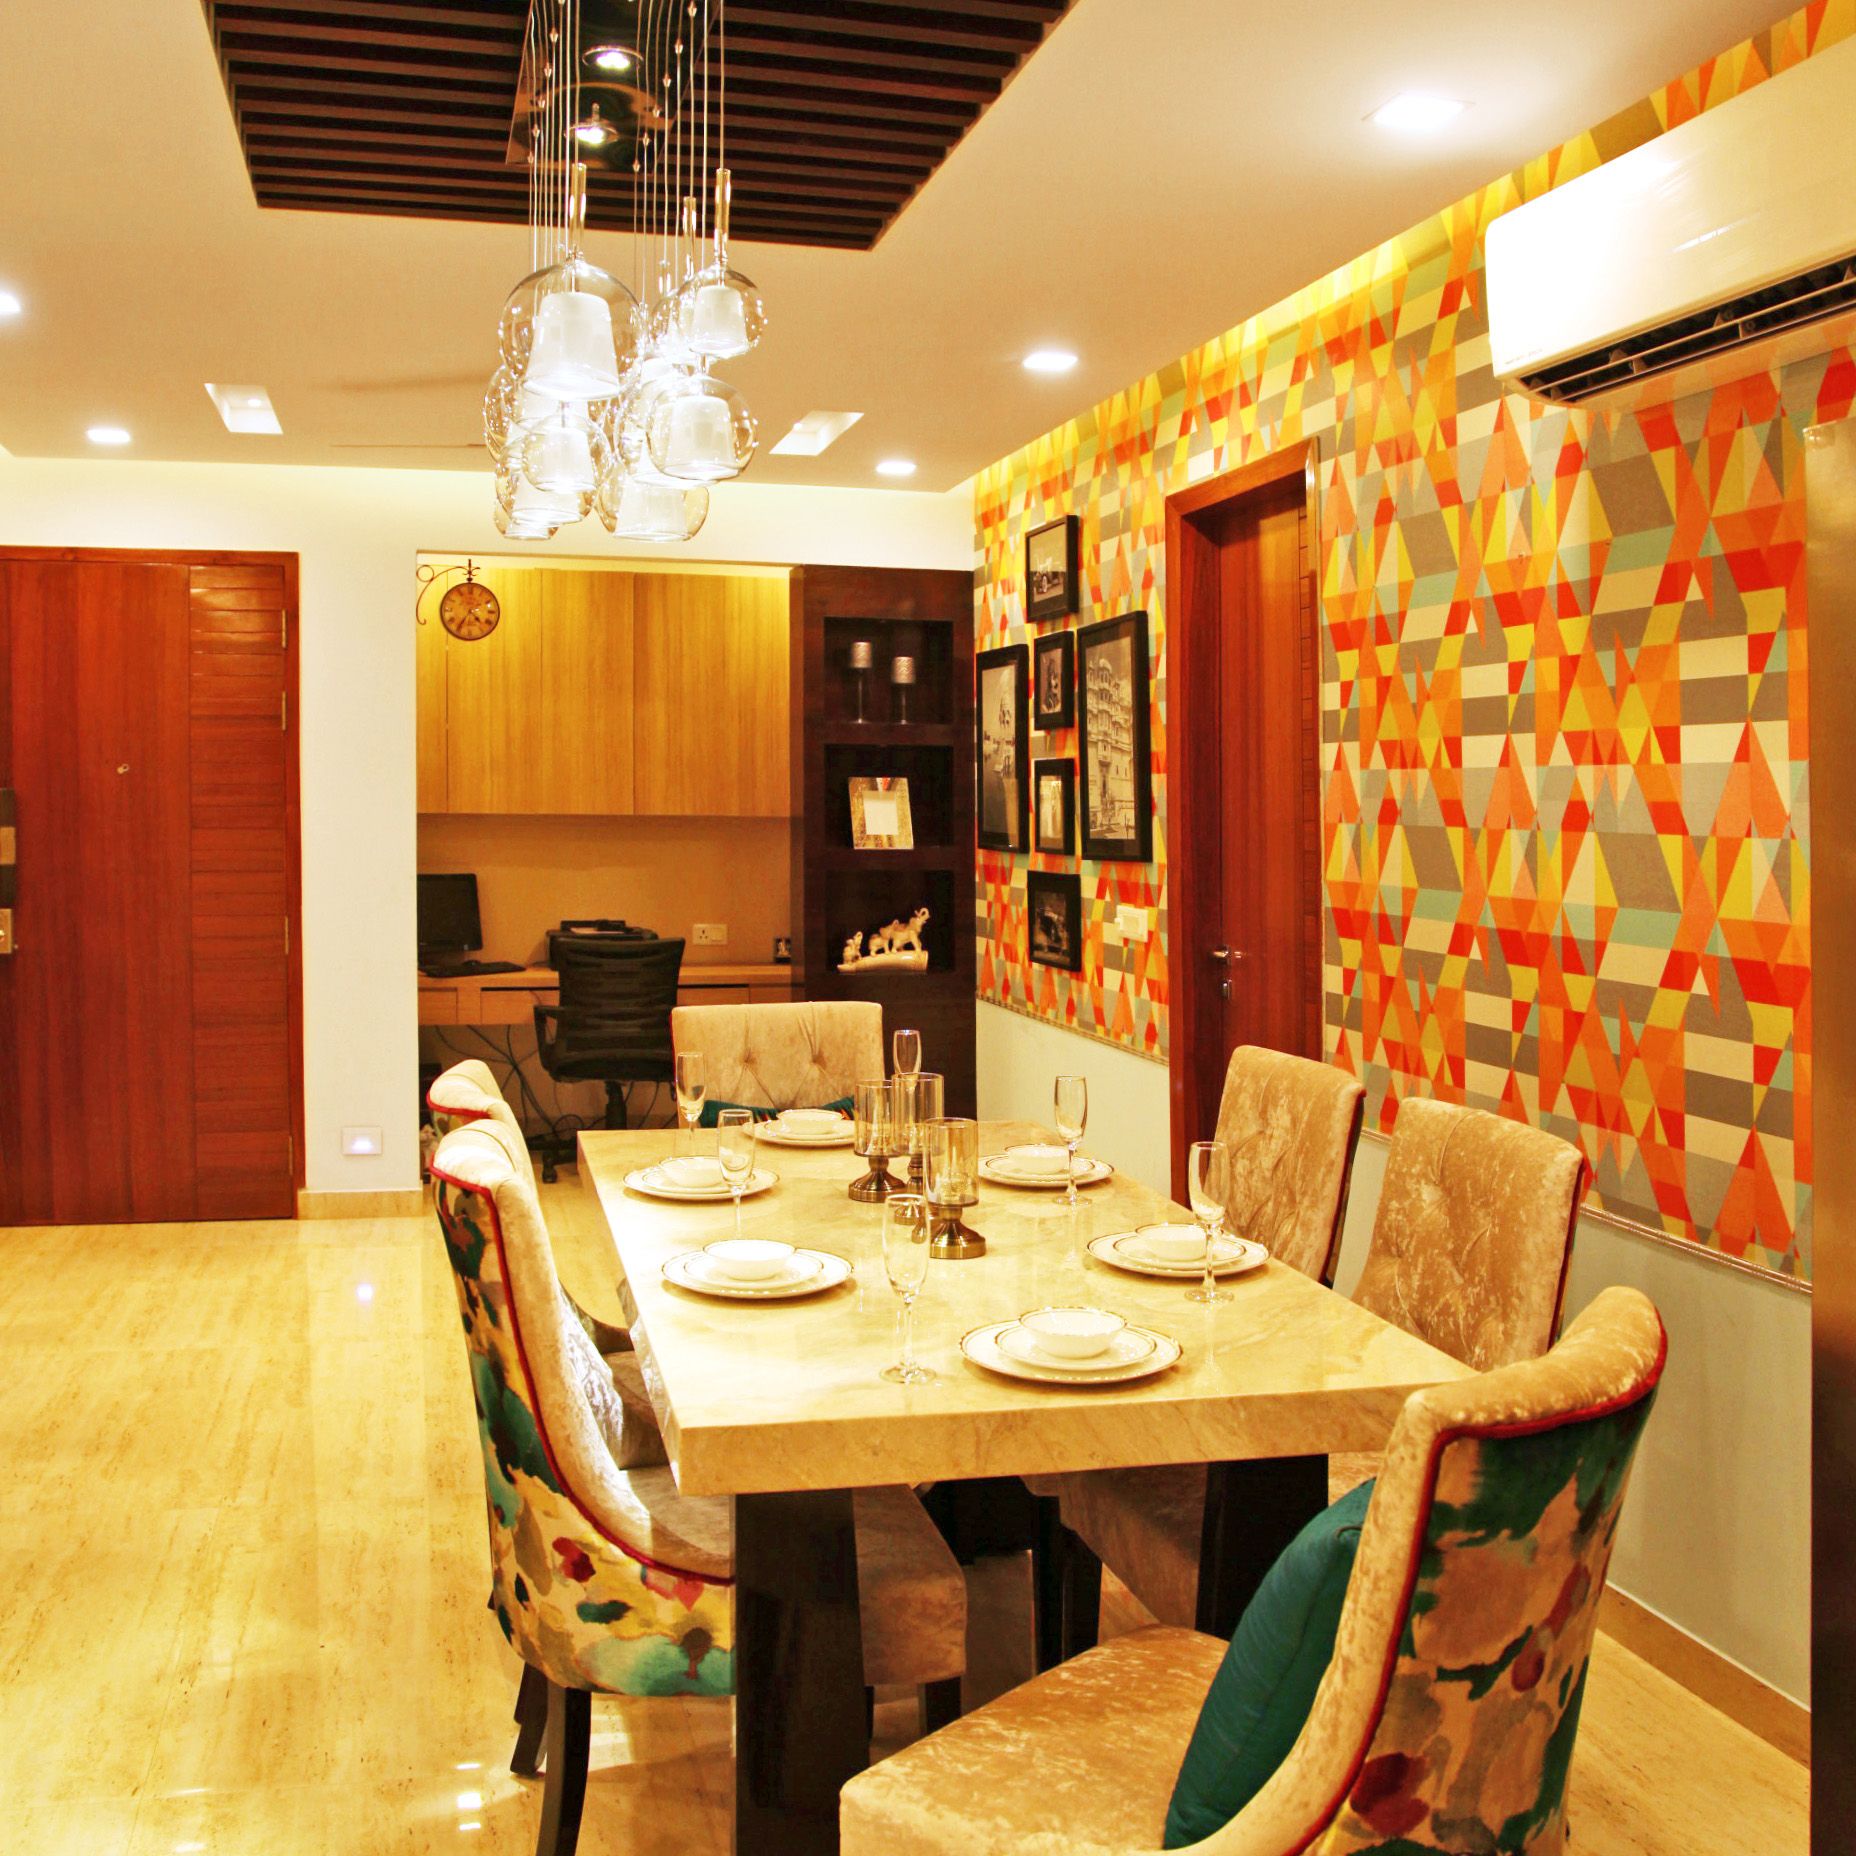 Contemporary 6-Seater Dining Room Design With A Colourful Wallpaper